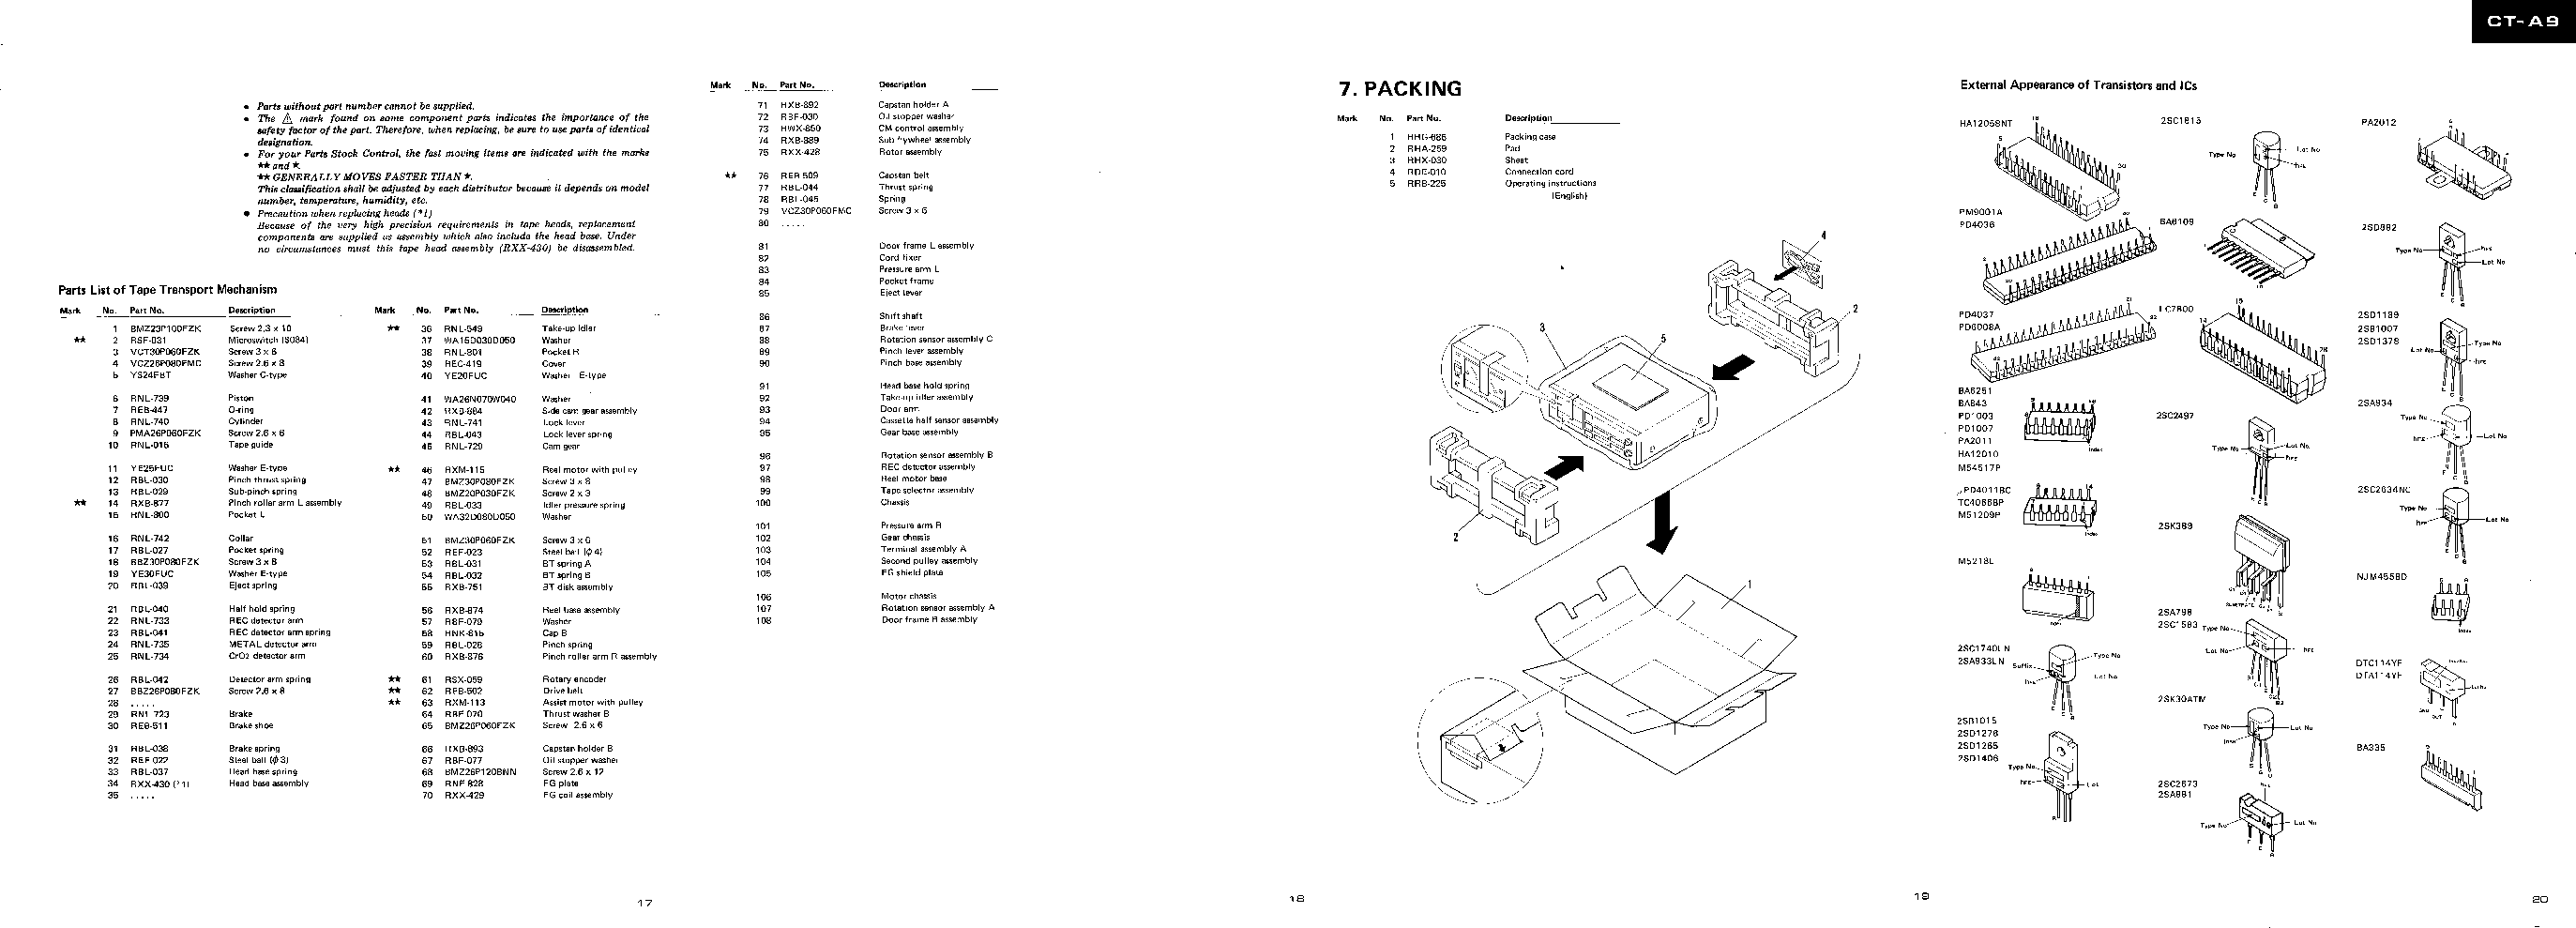 PIONEER CT-A9 PARTS SCH service manual (1st page)